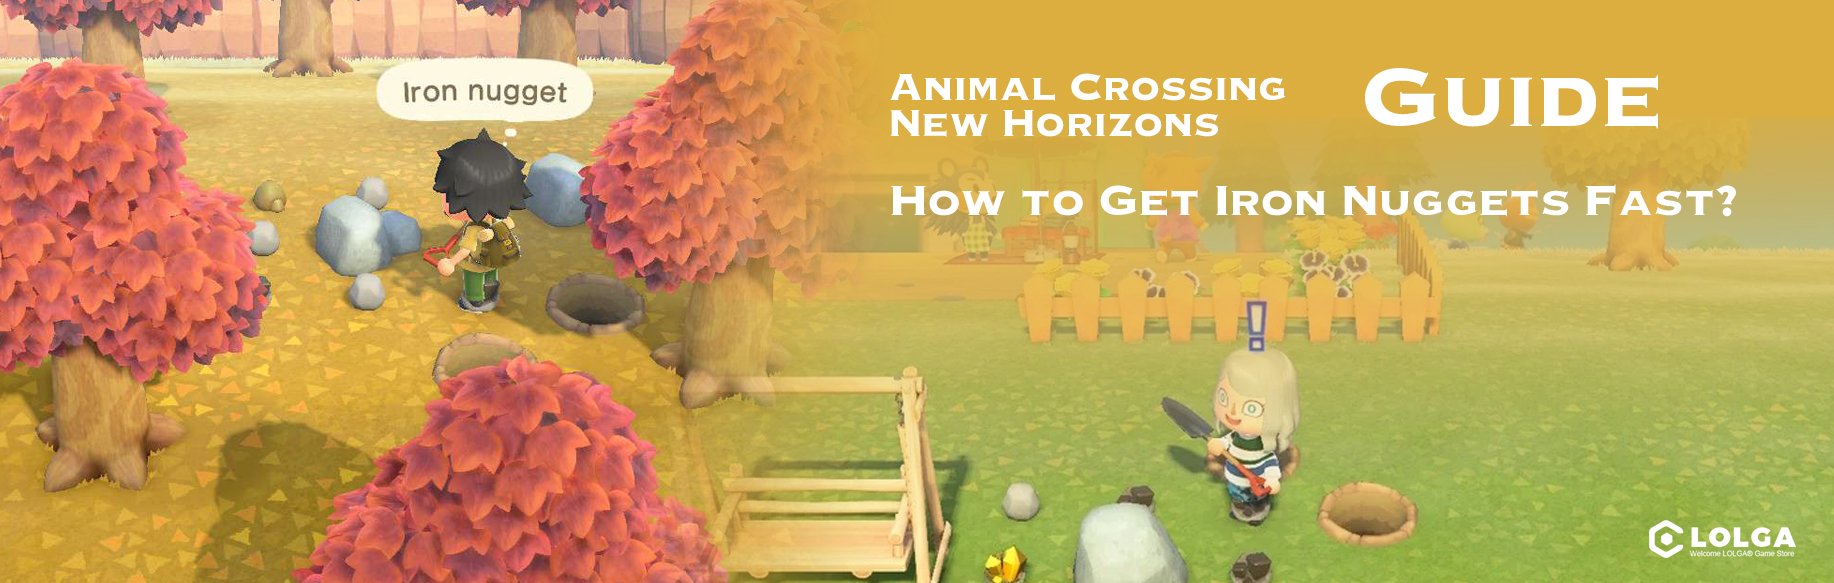 HAnimal Crossing New Horizons Guide : How to Get Iron Nuggets Fast?